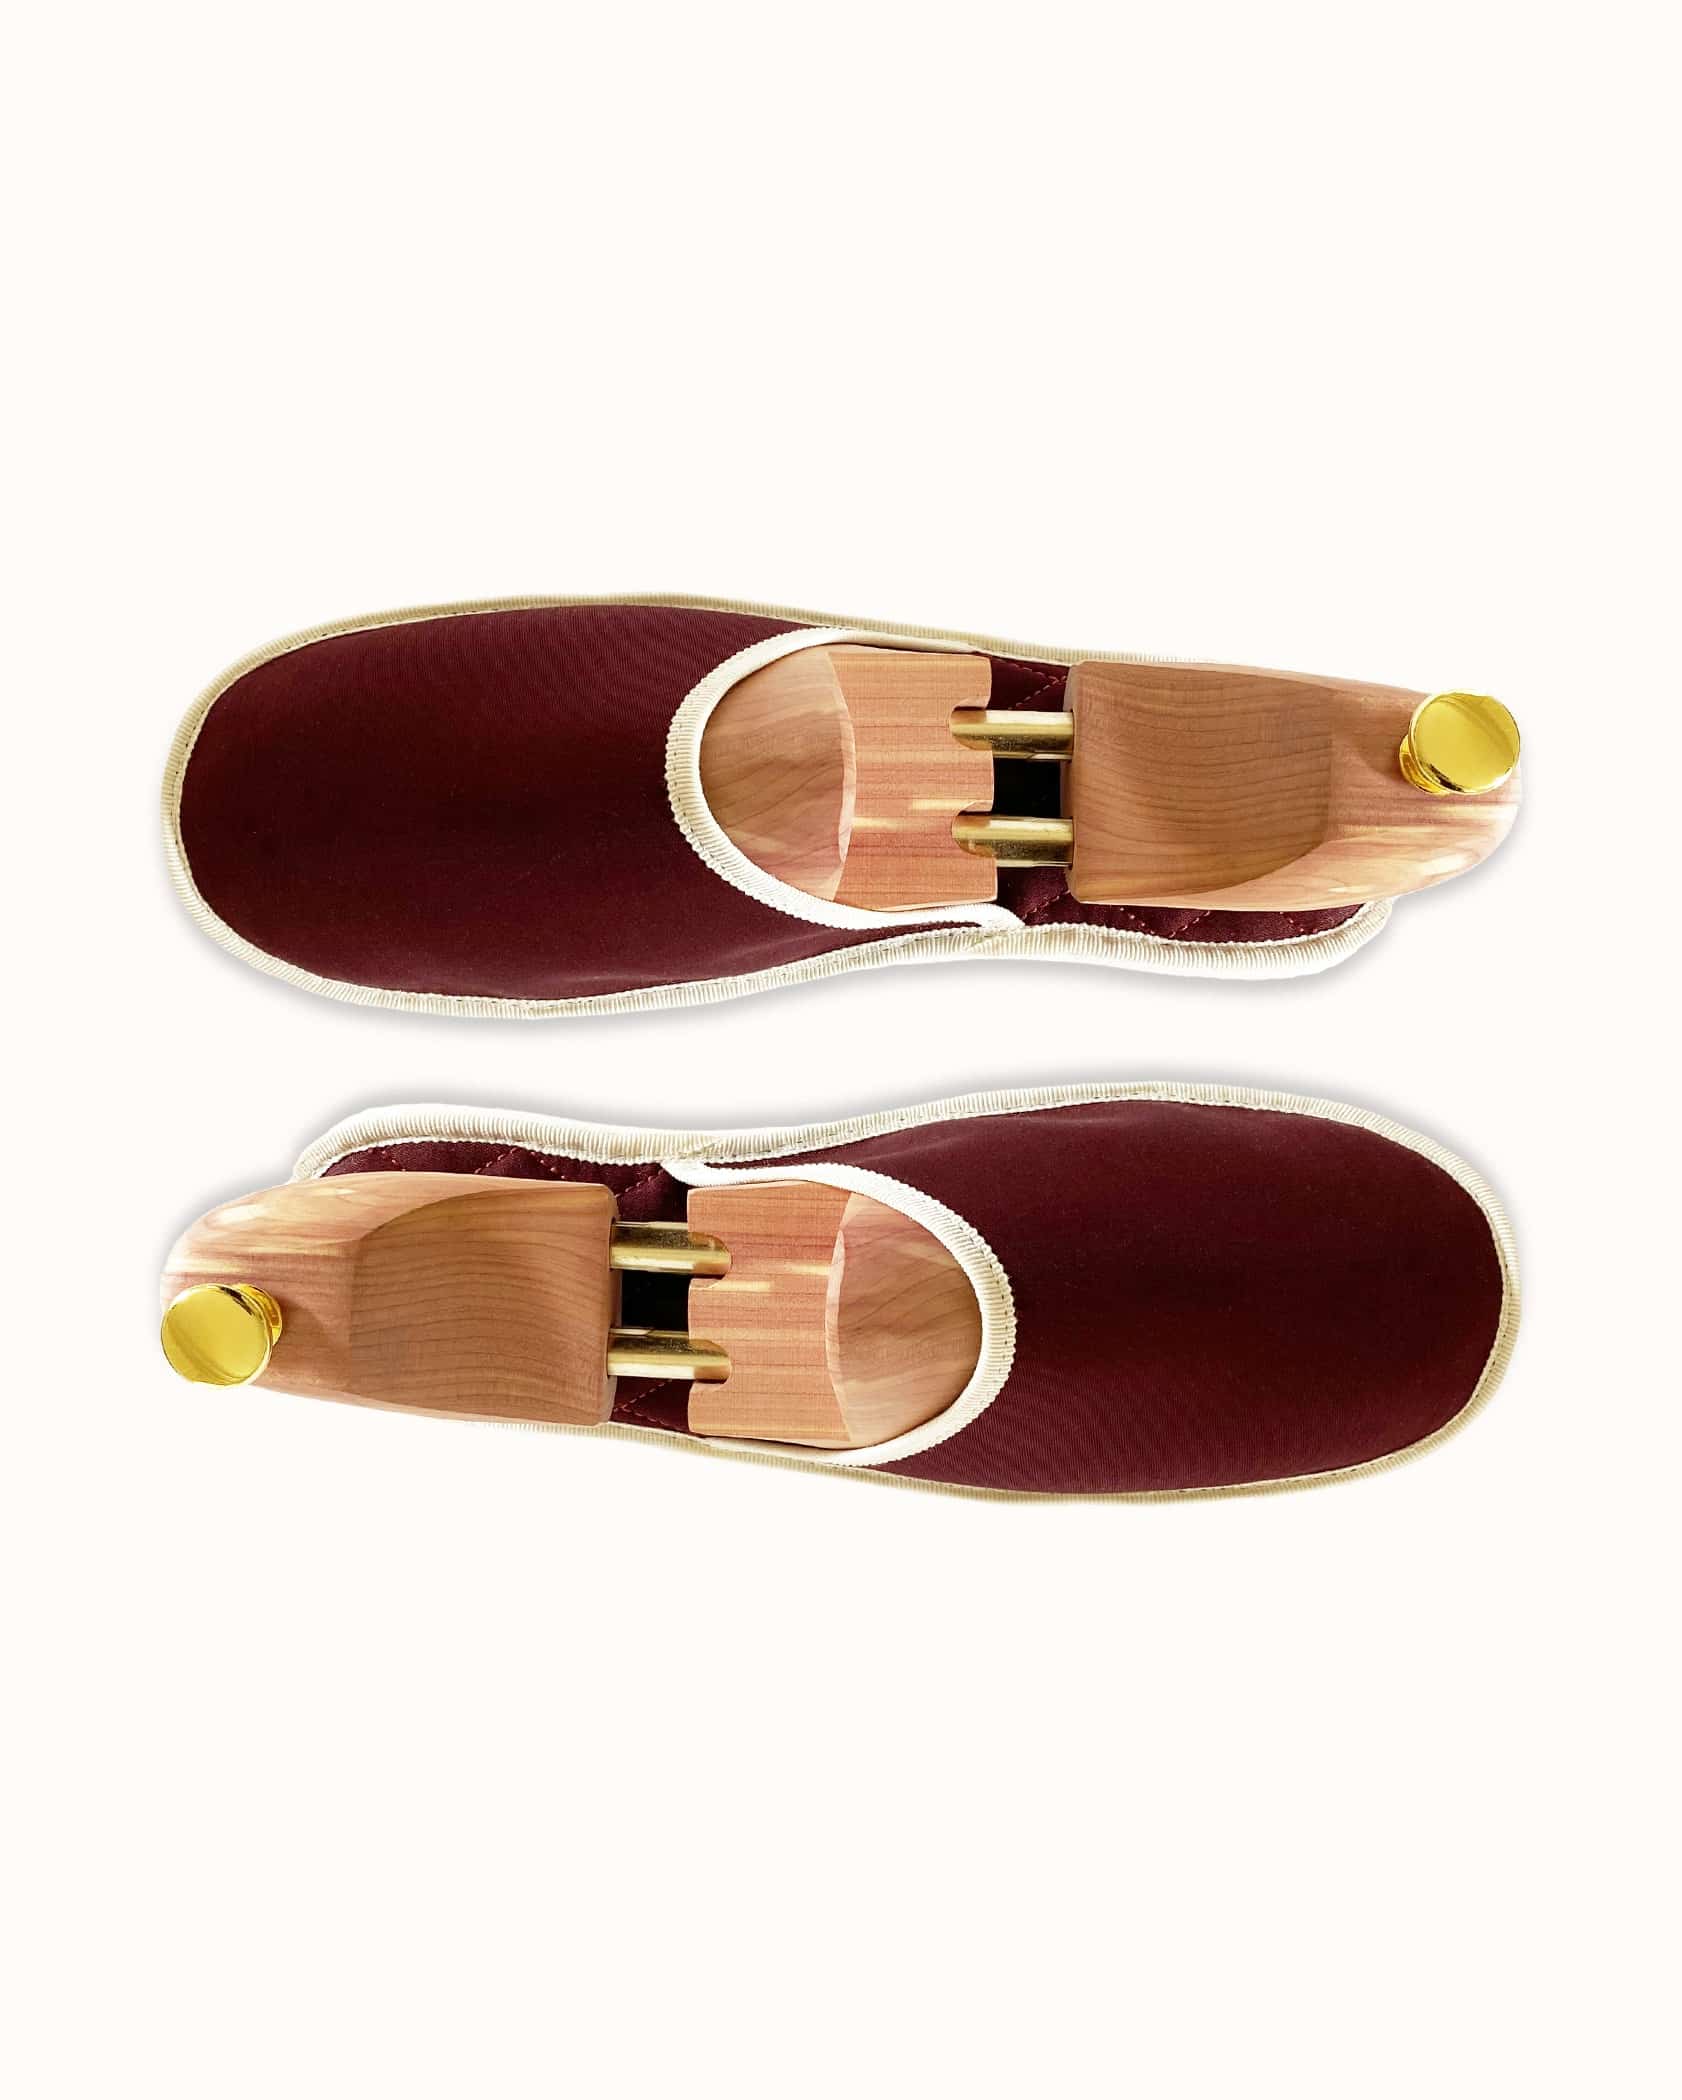 French slippers for men, women and kids. Le Spleen "Dionysos", red and white. A slip-on like hotel slippers with a quilted padding and an outstanding craftsmanship manufacturing. Made in France.